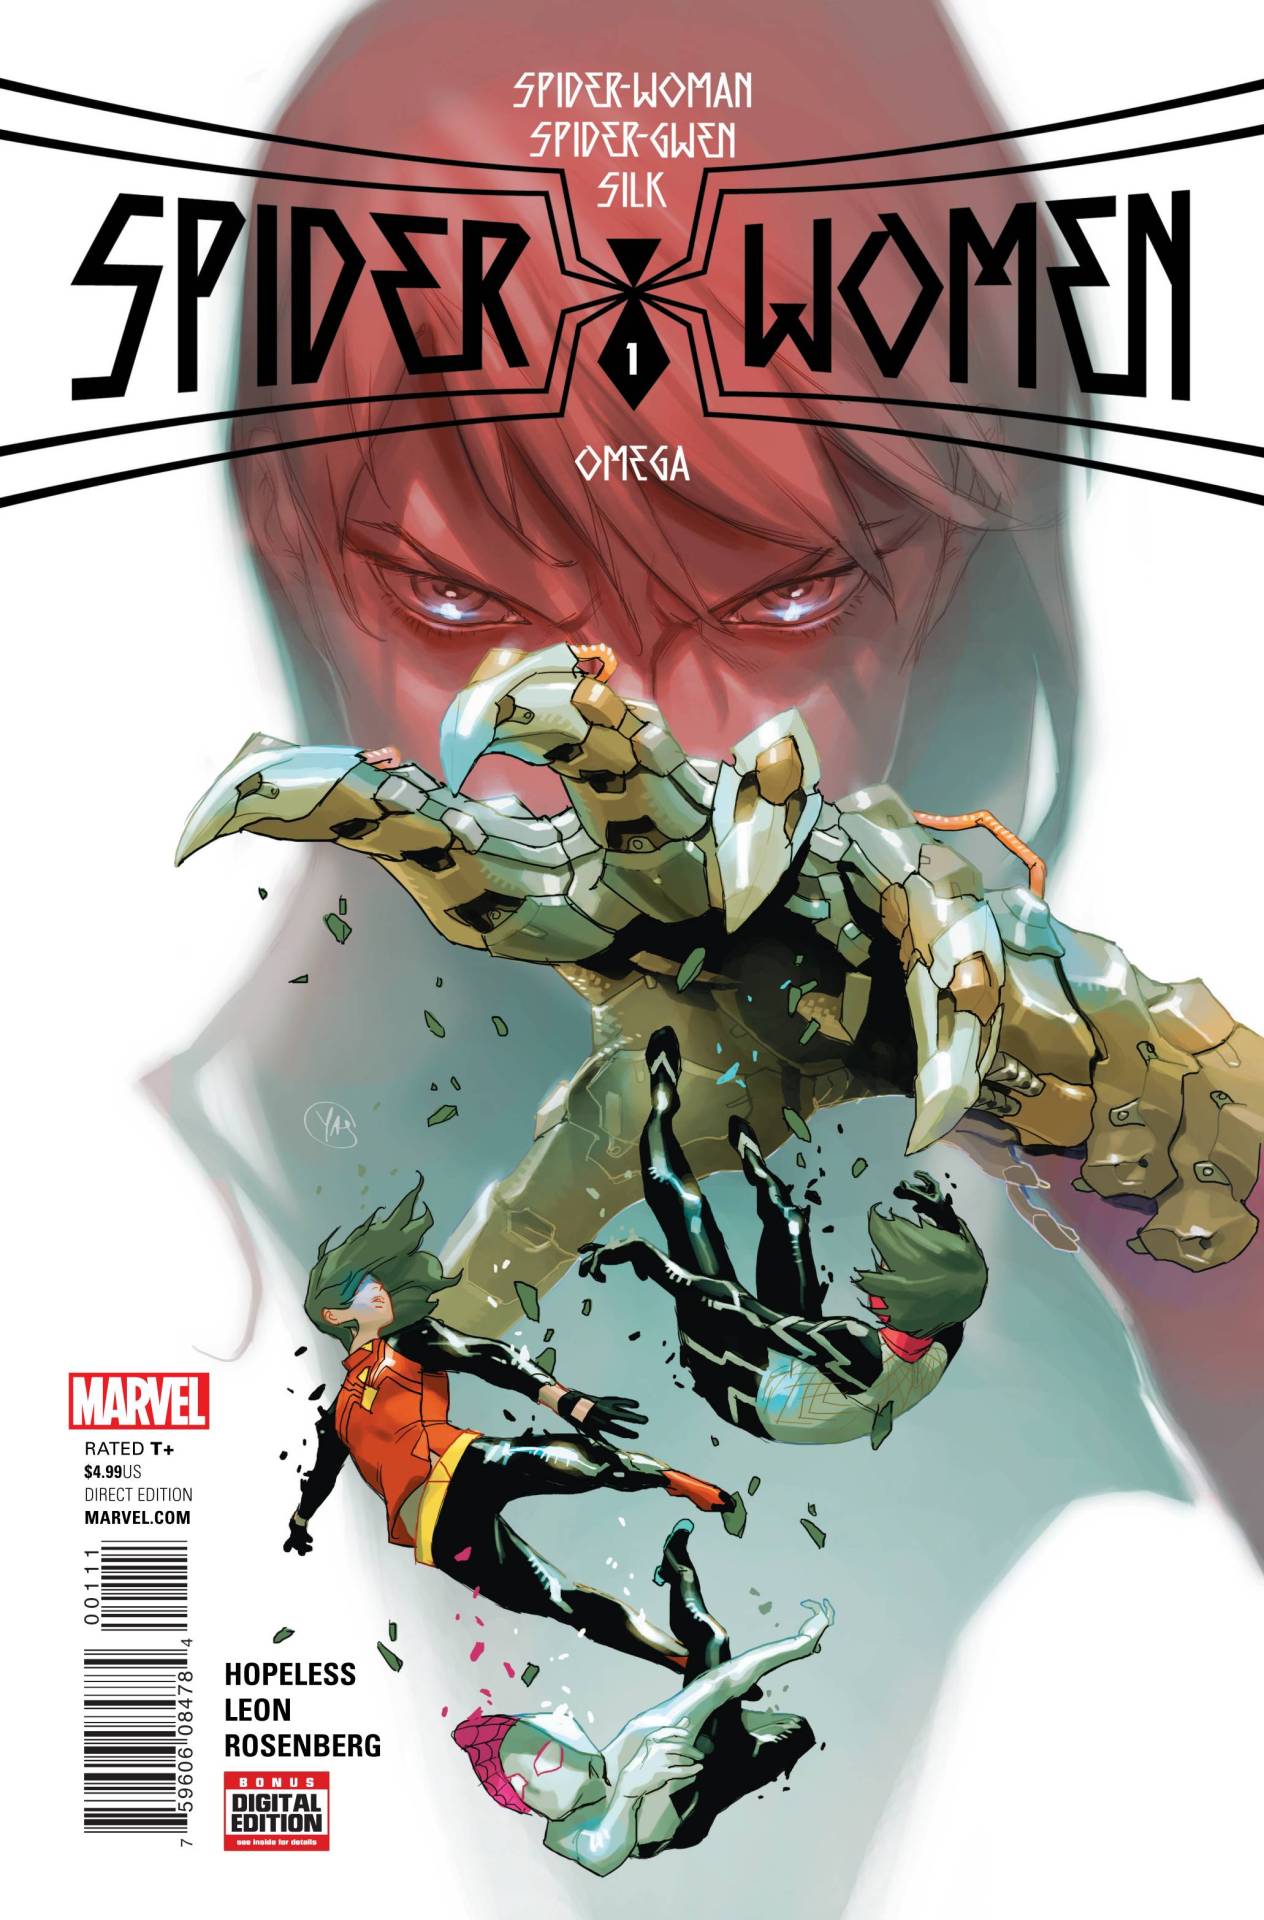 Outgunned and outnumbered, the odds are stacked against the Spider-Women in the final chapter of Marvel’s crossover event! Look for Spider-Women Omega #1, out tomorrow @ Curious Comics!